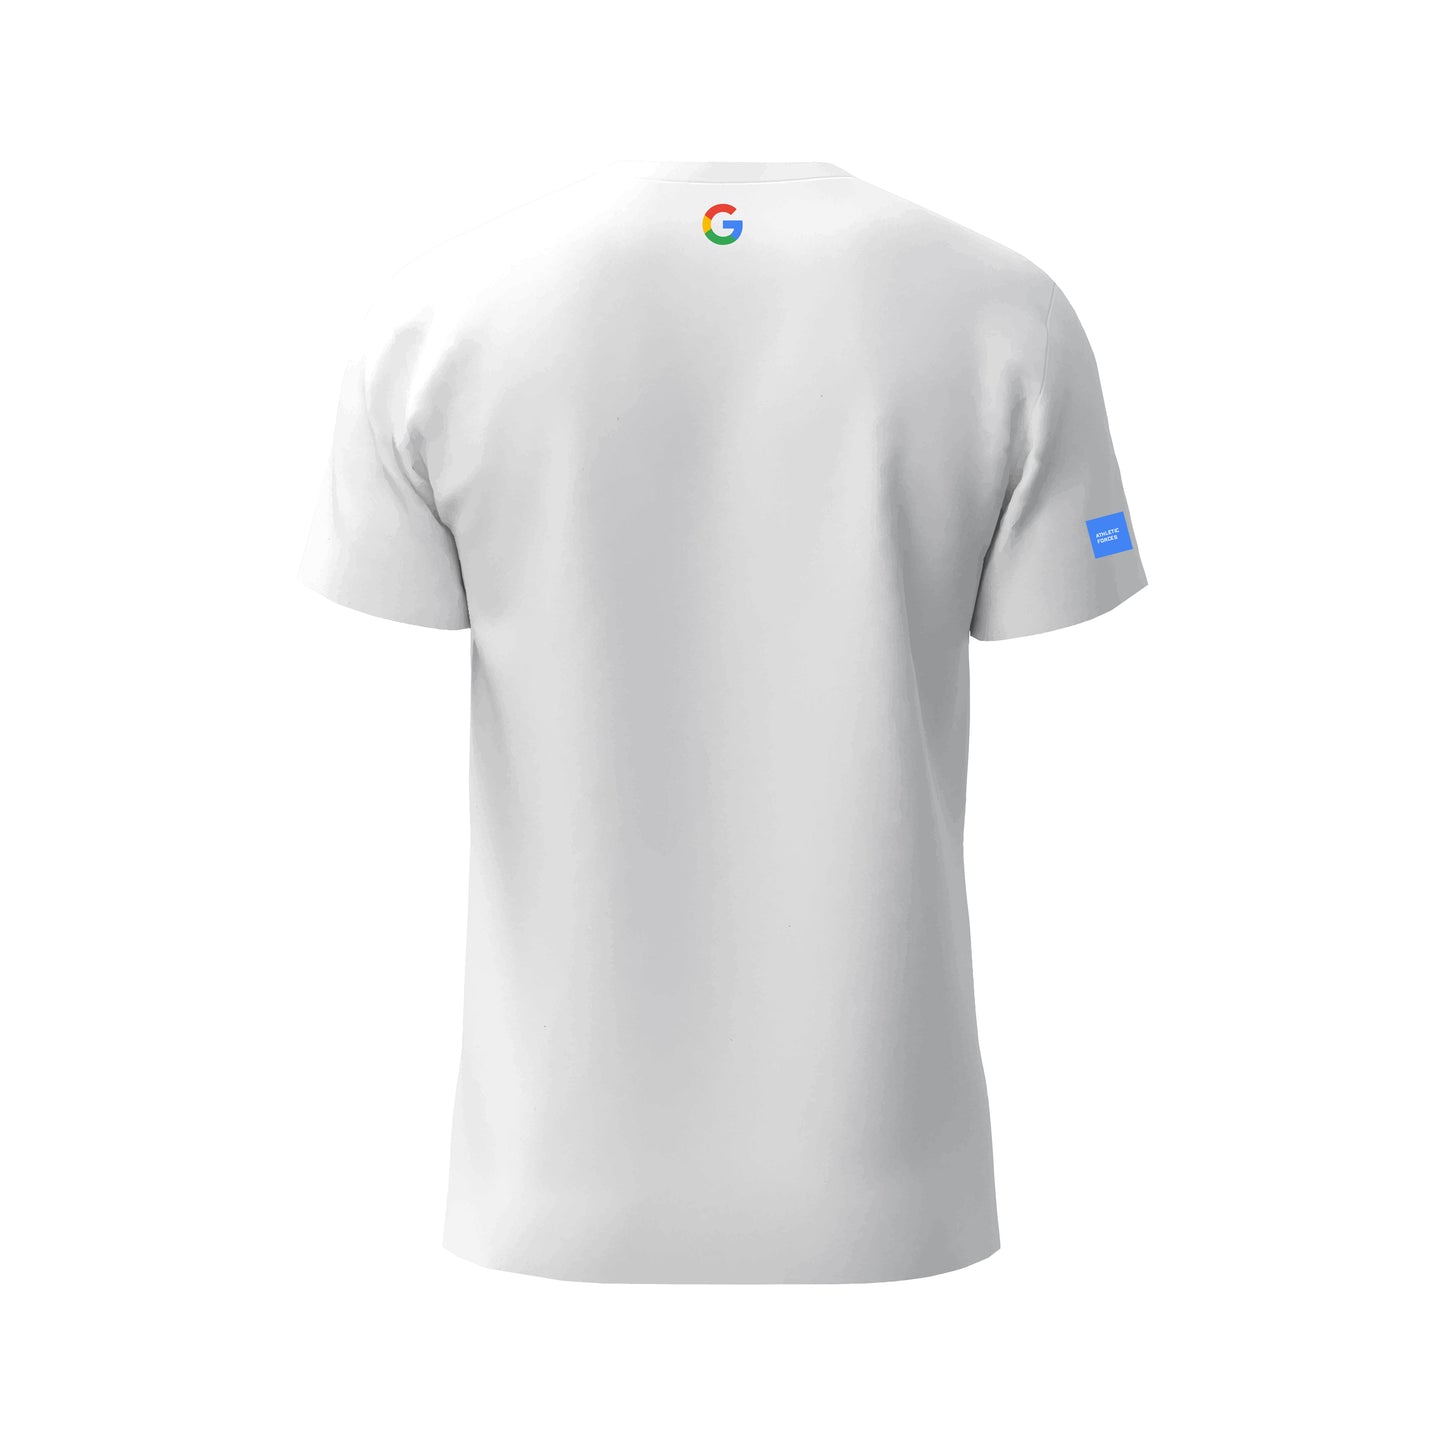 Google - Union of Forces ® T-Shirt by Athletic Forces -  Model 1